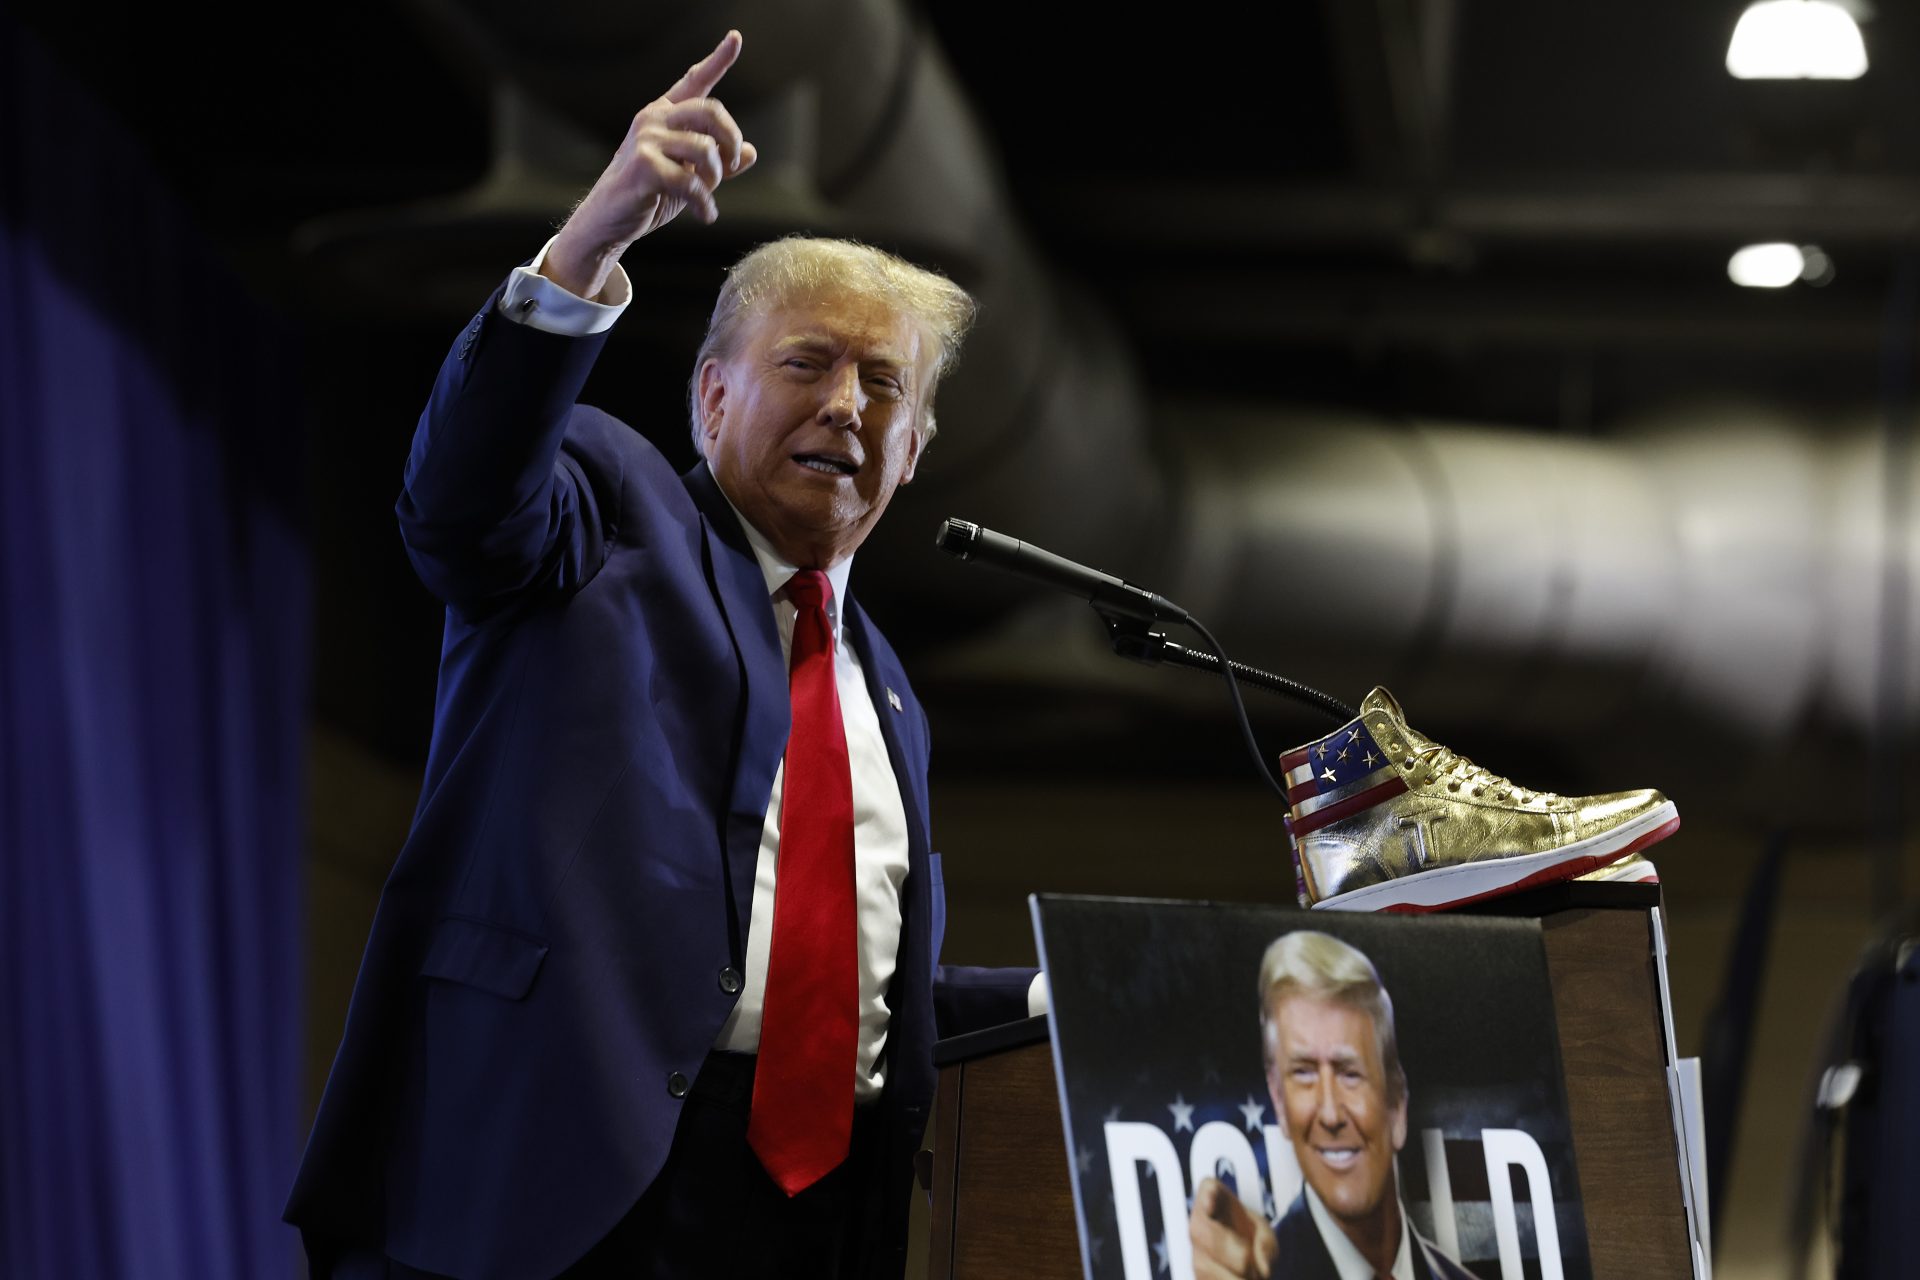 Will Trump's 'Never Surrender' sneakers join the likes of his other failed businesses?